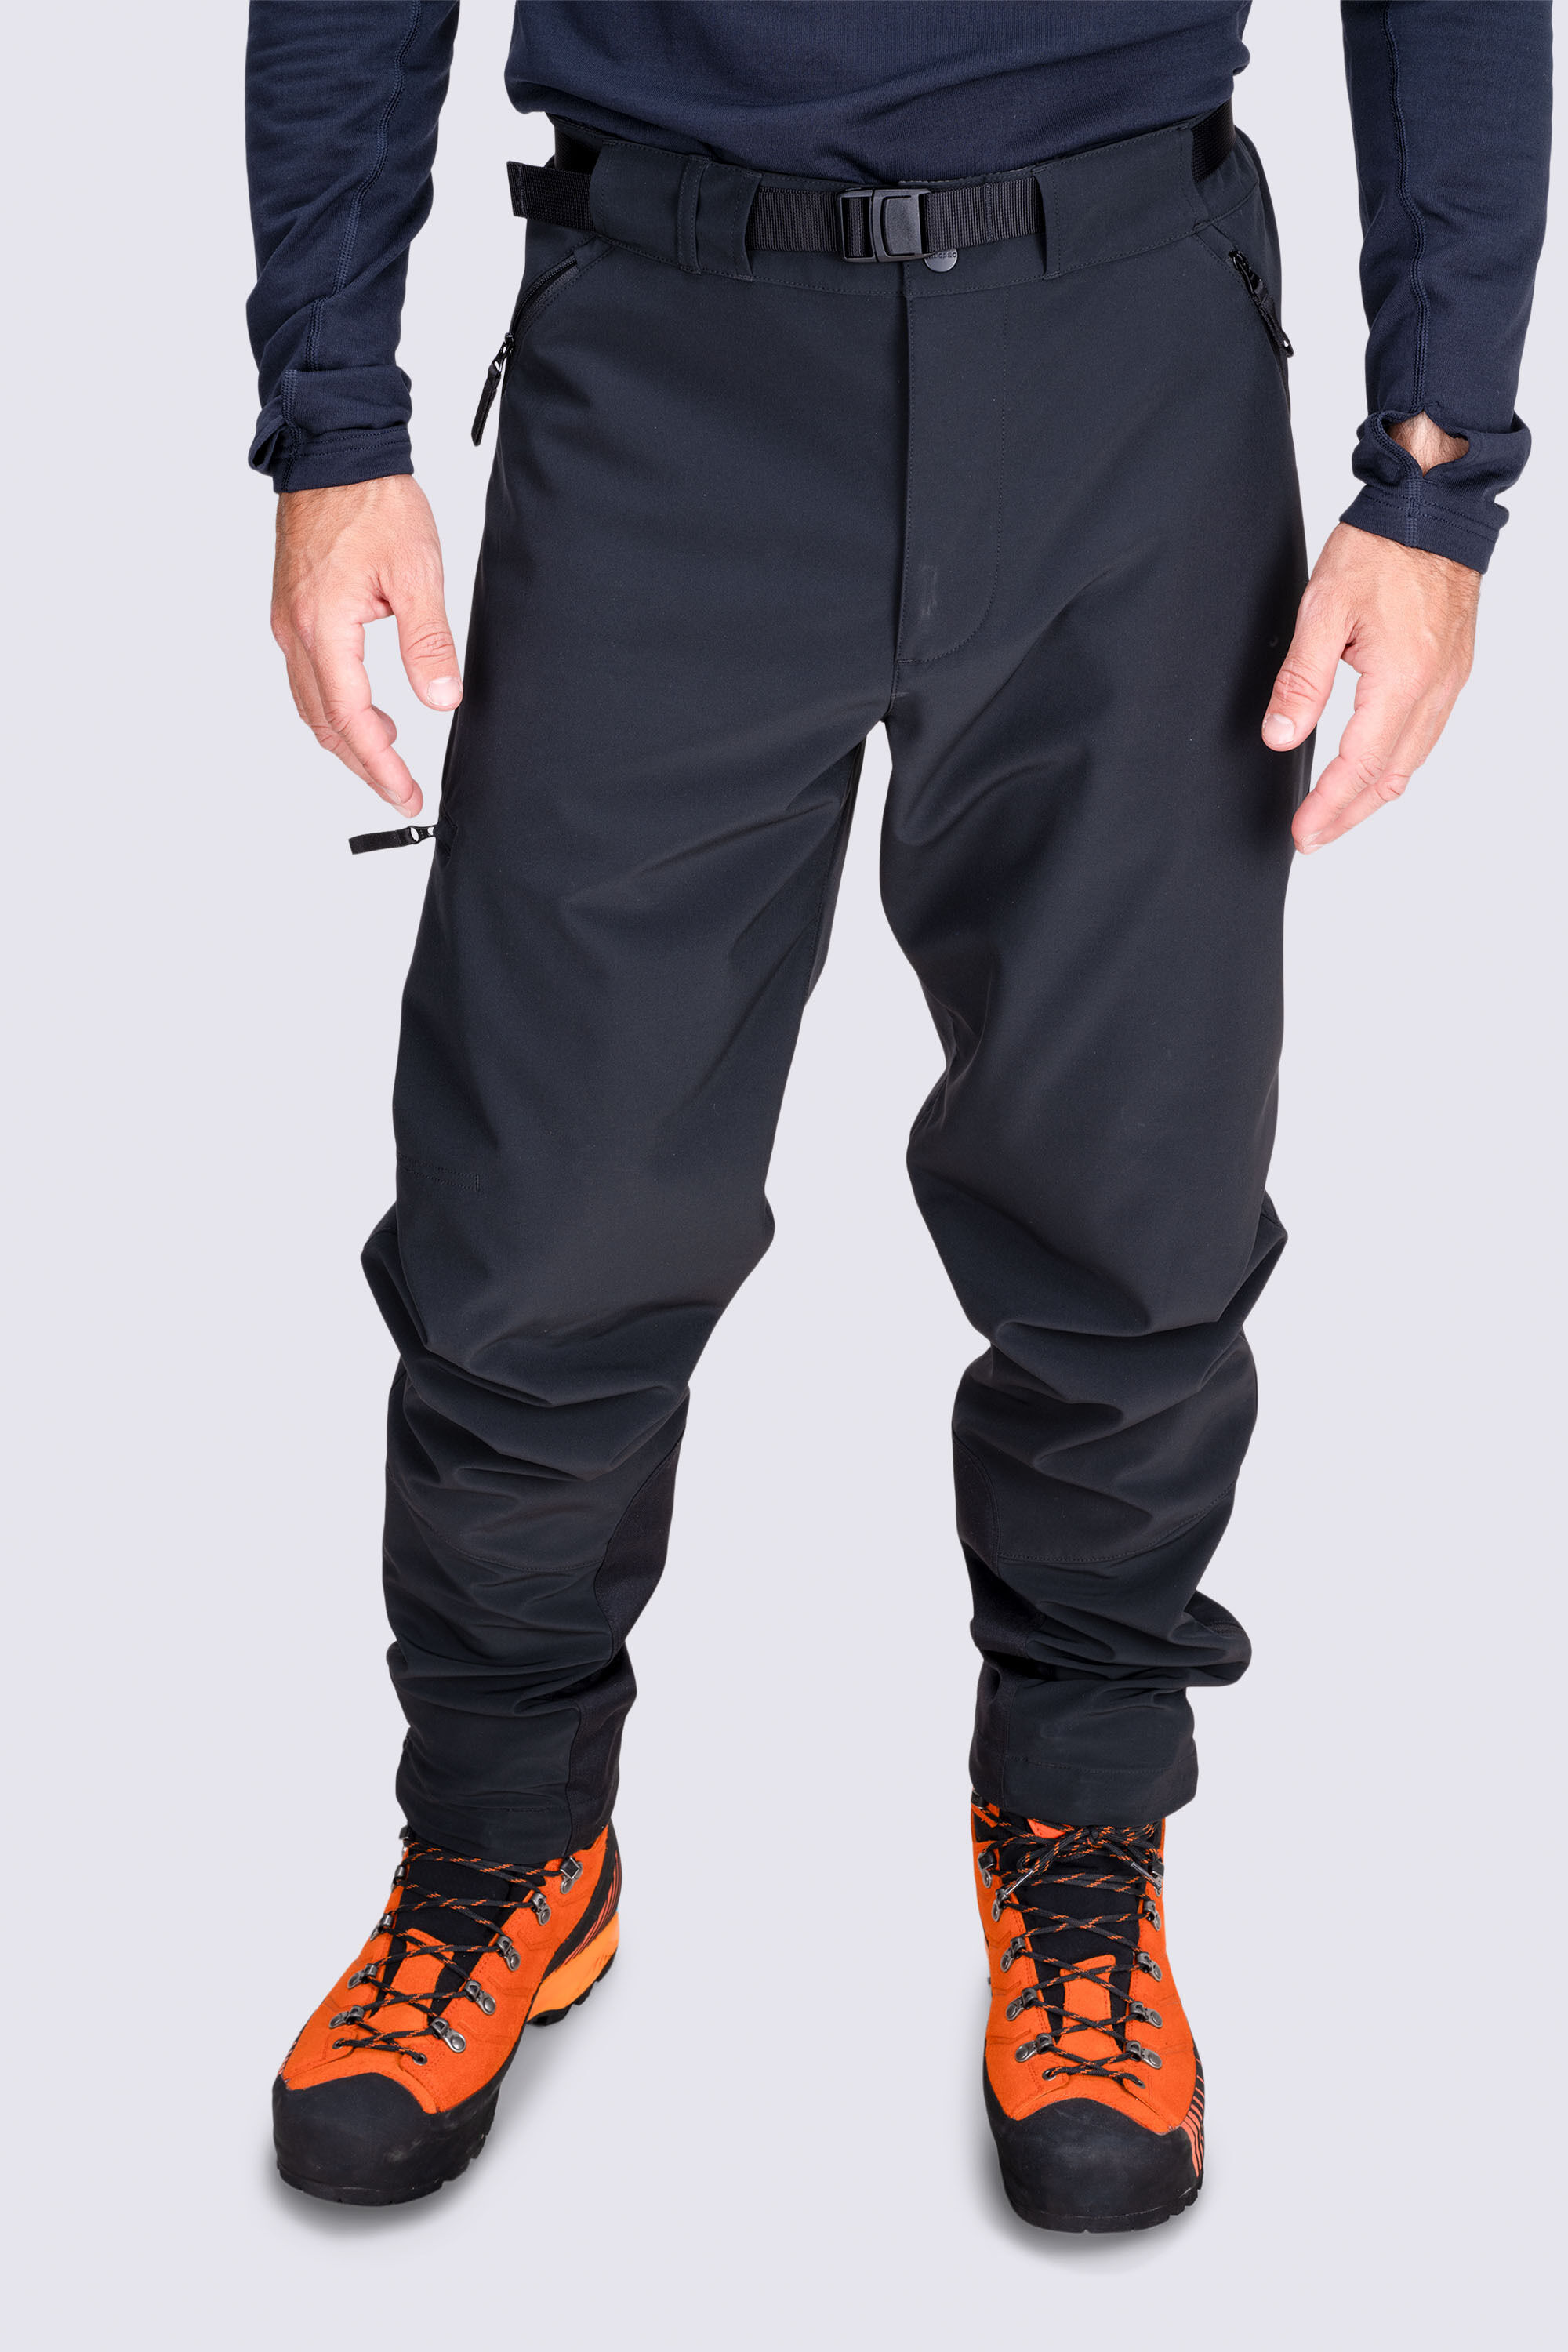 Ares Khaki Climbing, Bouldering and Hiking Trousers Buy online.